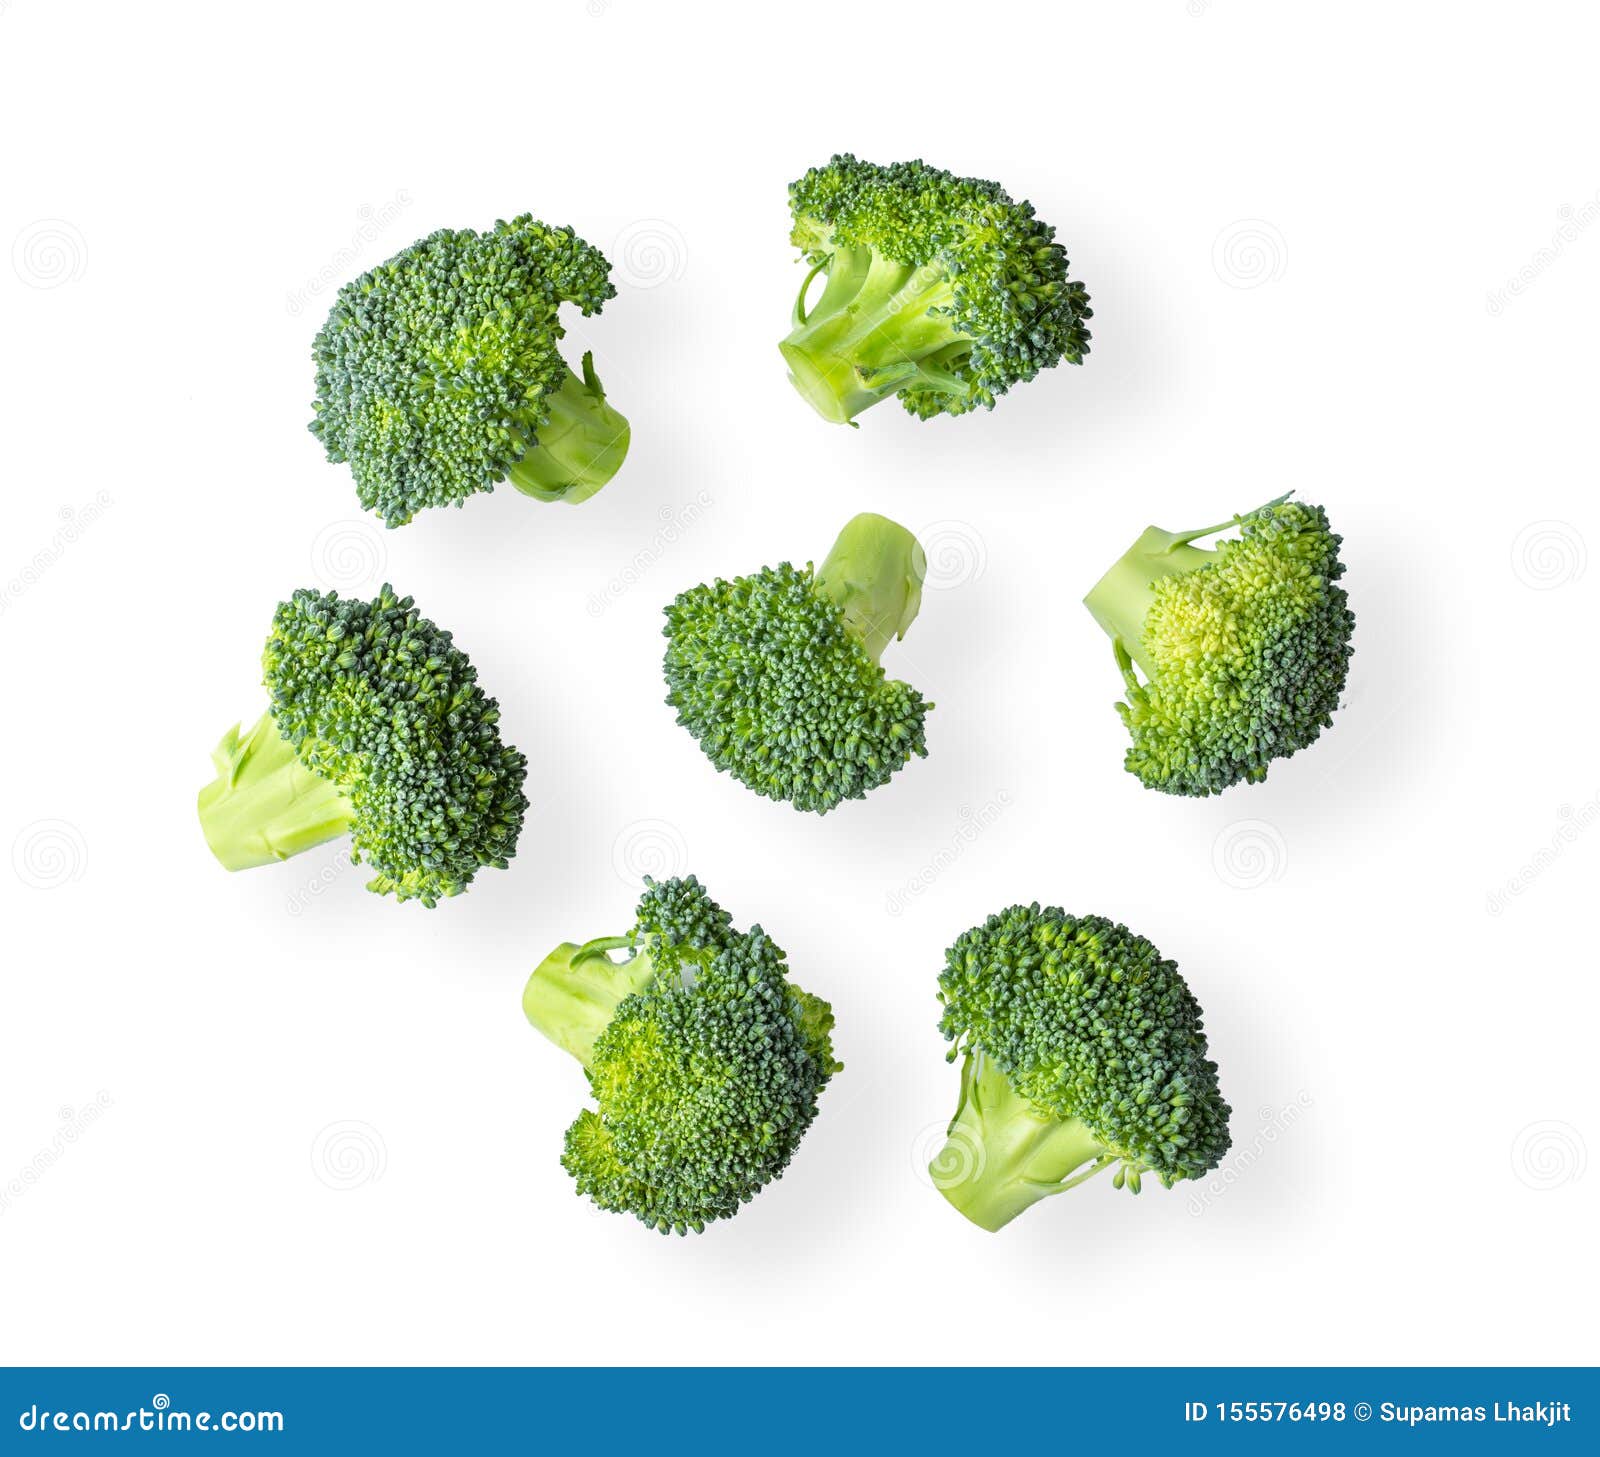 Broccoli on White Background Top View Stock Photo - Image of fresh, vegetable: 155576498